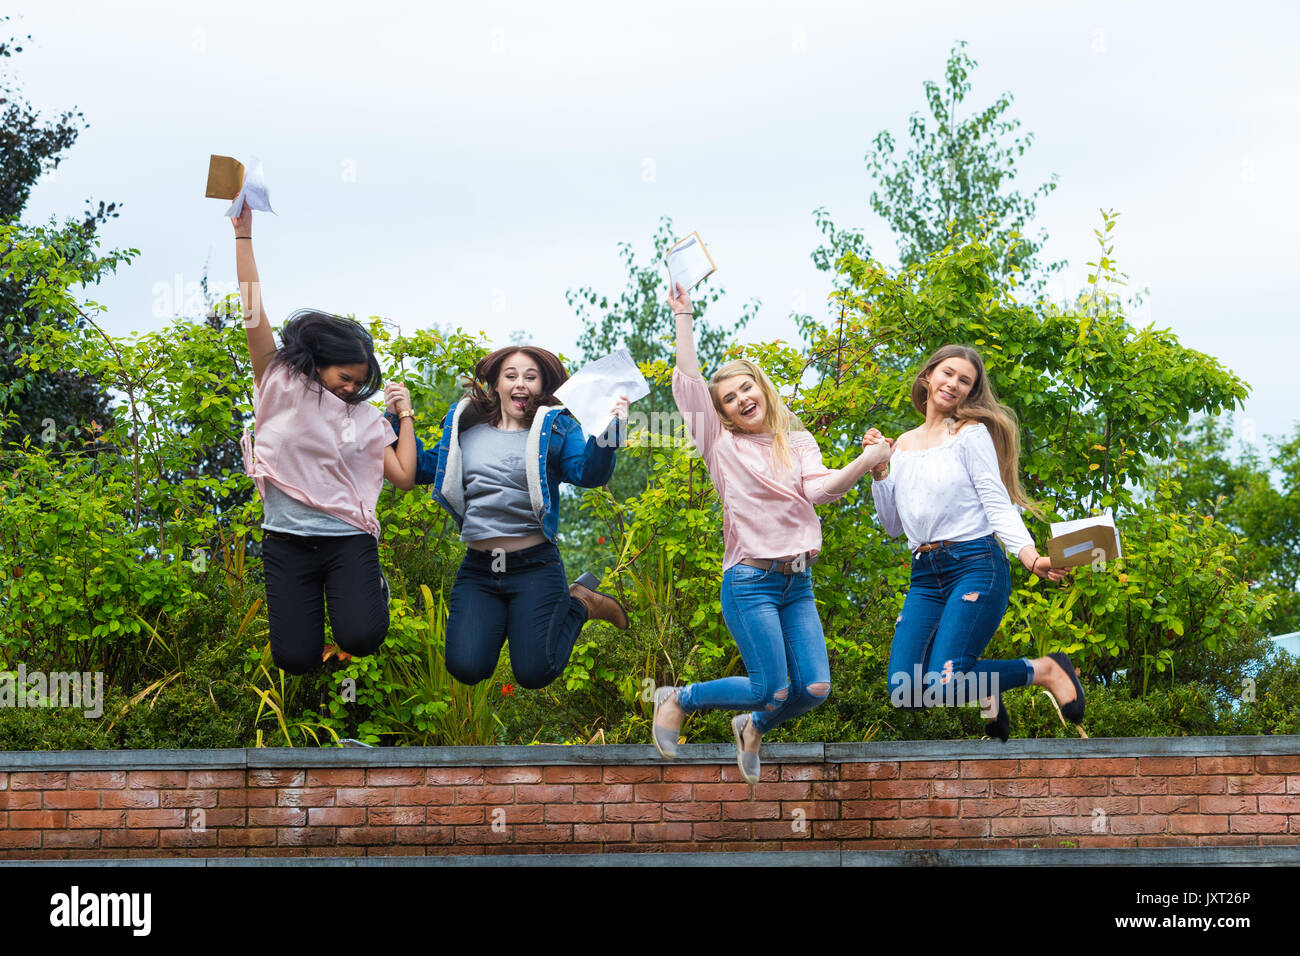 Bromsgrove, Worcs, UK. 17th Aug, 2017. GCE Advanced Level school and college students in England and Wales receive their exam and course results after two years of study before deciding whether to go on to university. Credit: Peter Lopeman/Alamy Live News Stock Photo